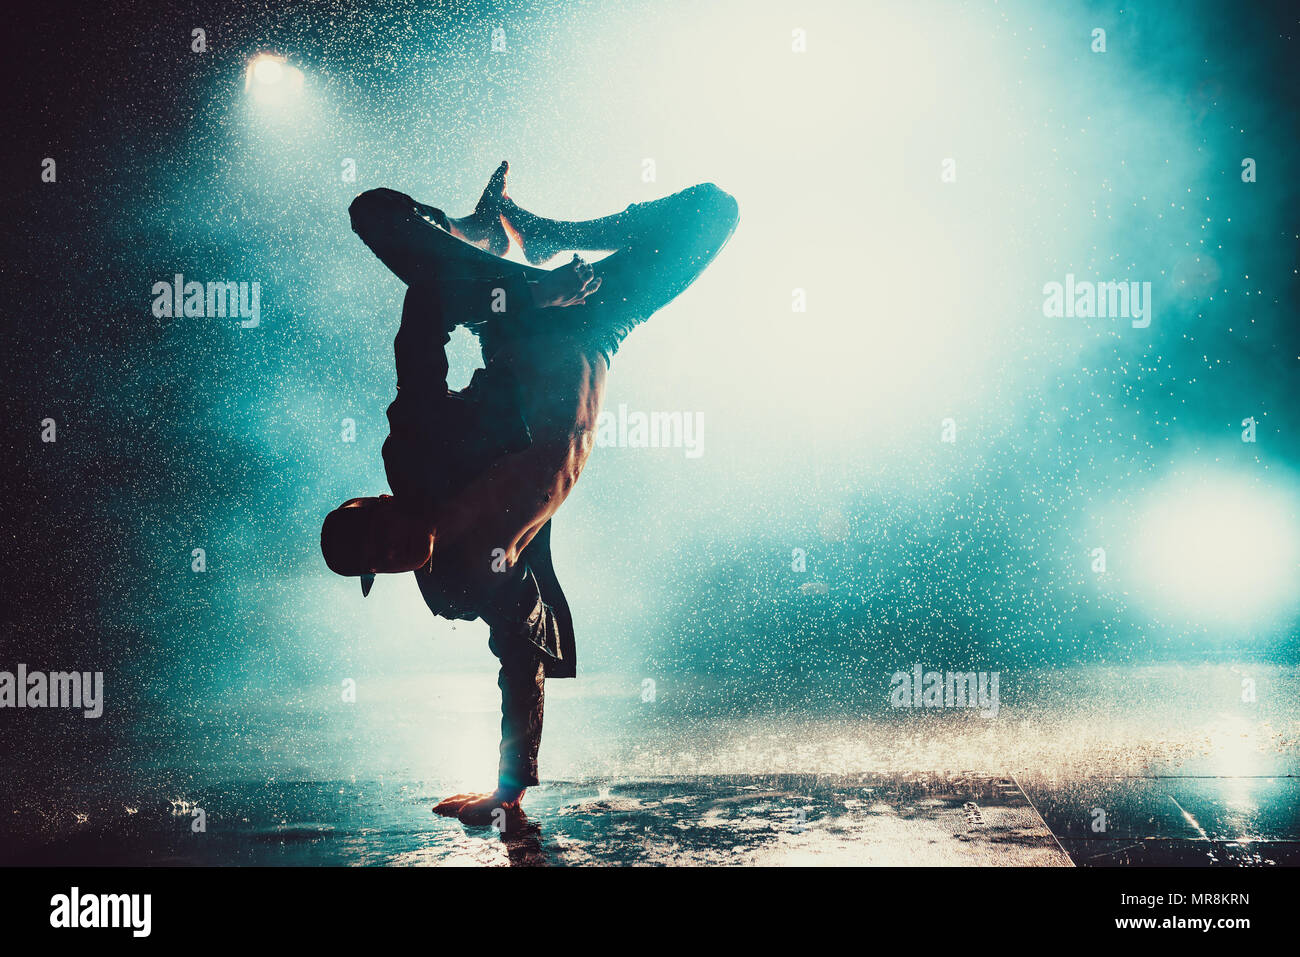 Young man break dancing in club with lights and water. Blue dramatic colors. Stock Photo